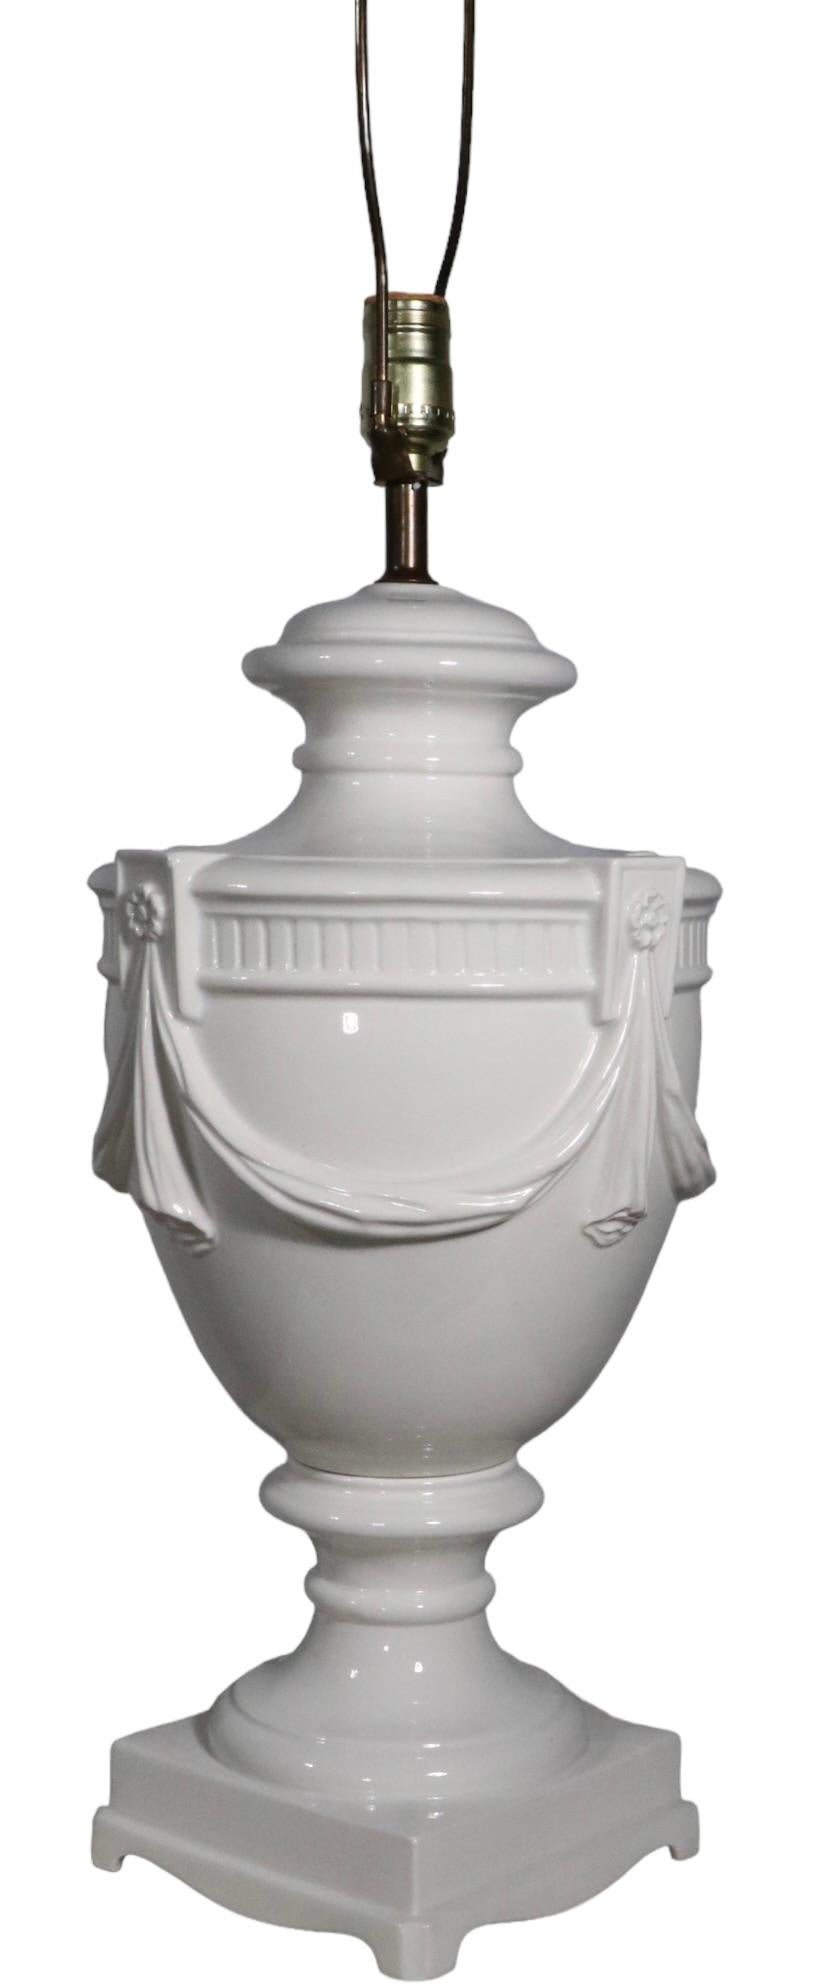 White on White Ceramic Urn Form Table Lamp Made in Italy, circa, 1950s-1970s In Good Condition For Sale In New York, NY